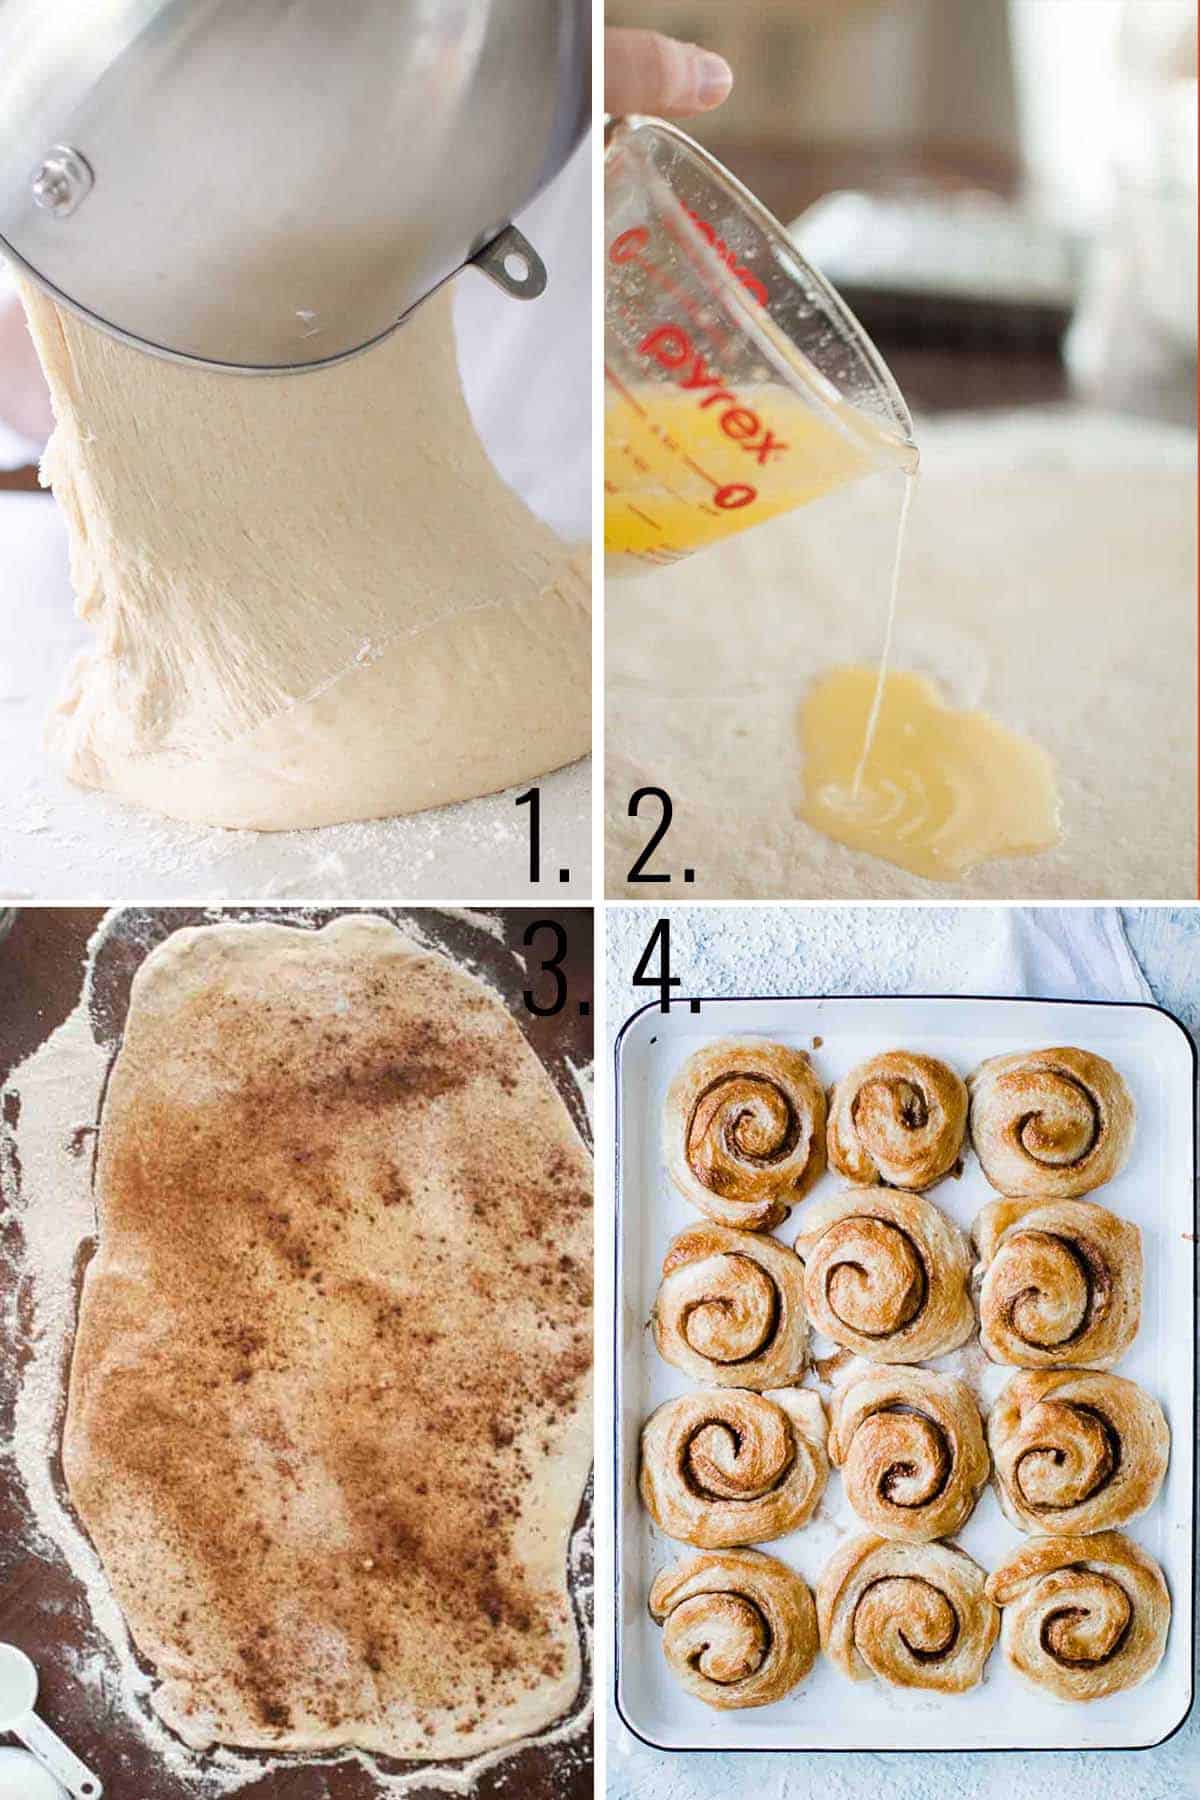 Collage of images showing how to make fluffy cinnamon rolls.